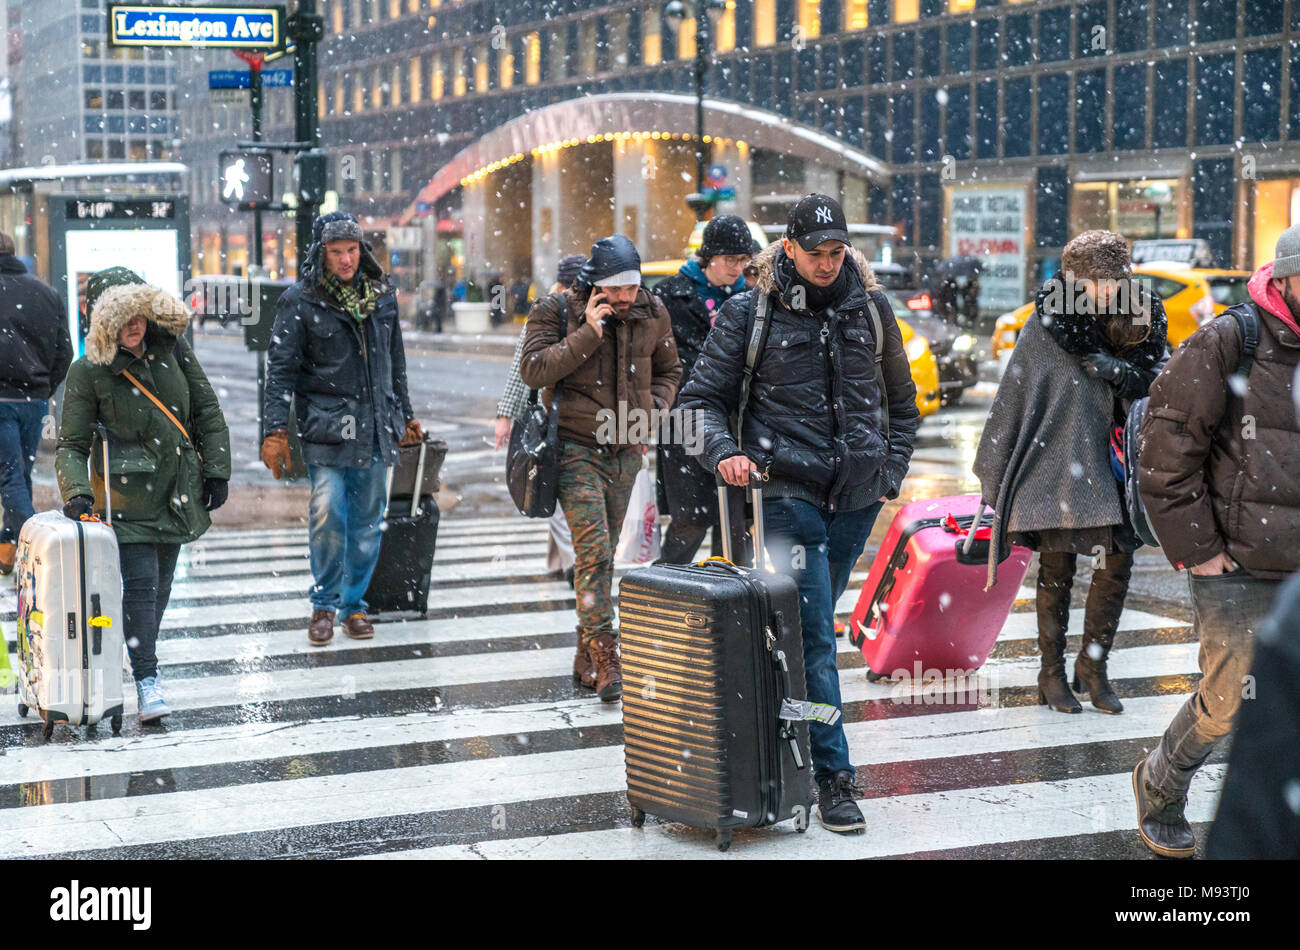 New York, USA. 21 March 2018.  People just continue their normal life under a snowstorm in New York city.  Photo by Enrique Shore/Alamy Stock Photo Stock Photo